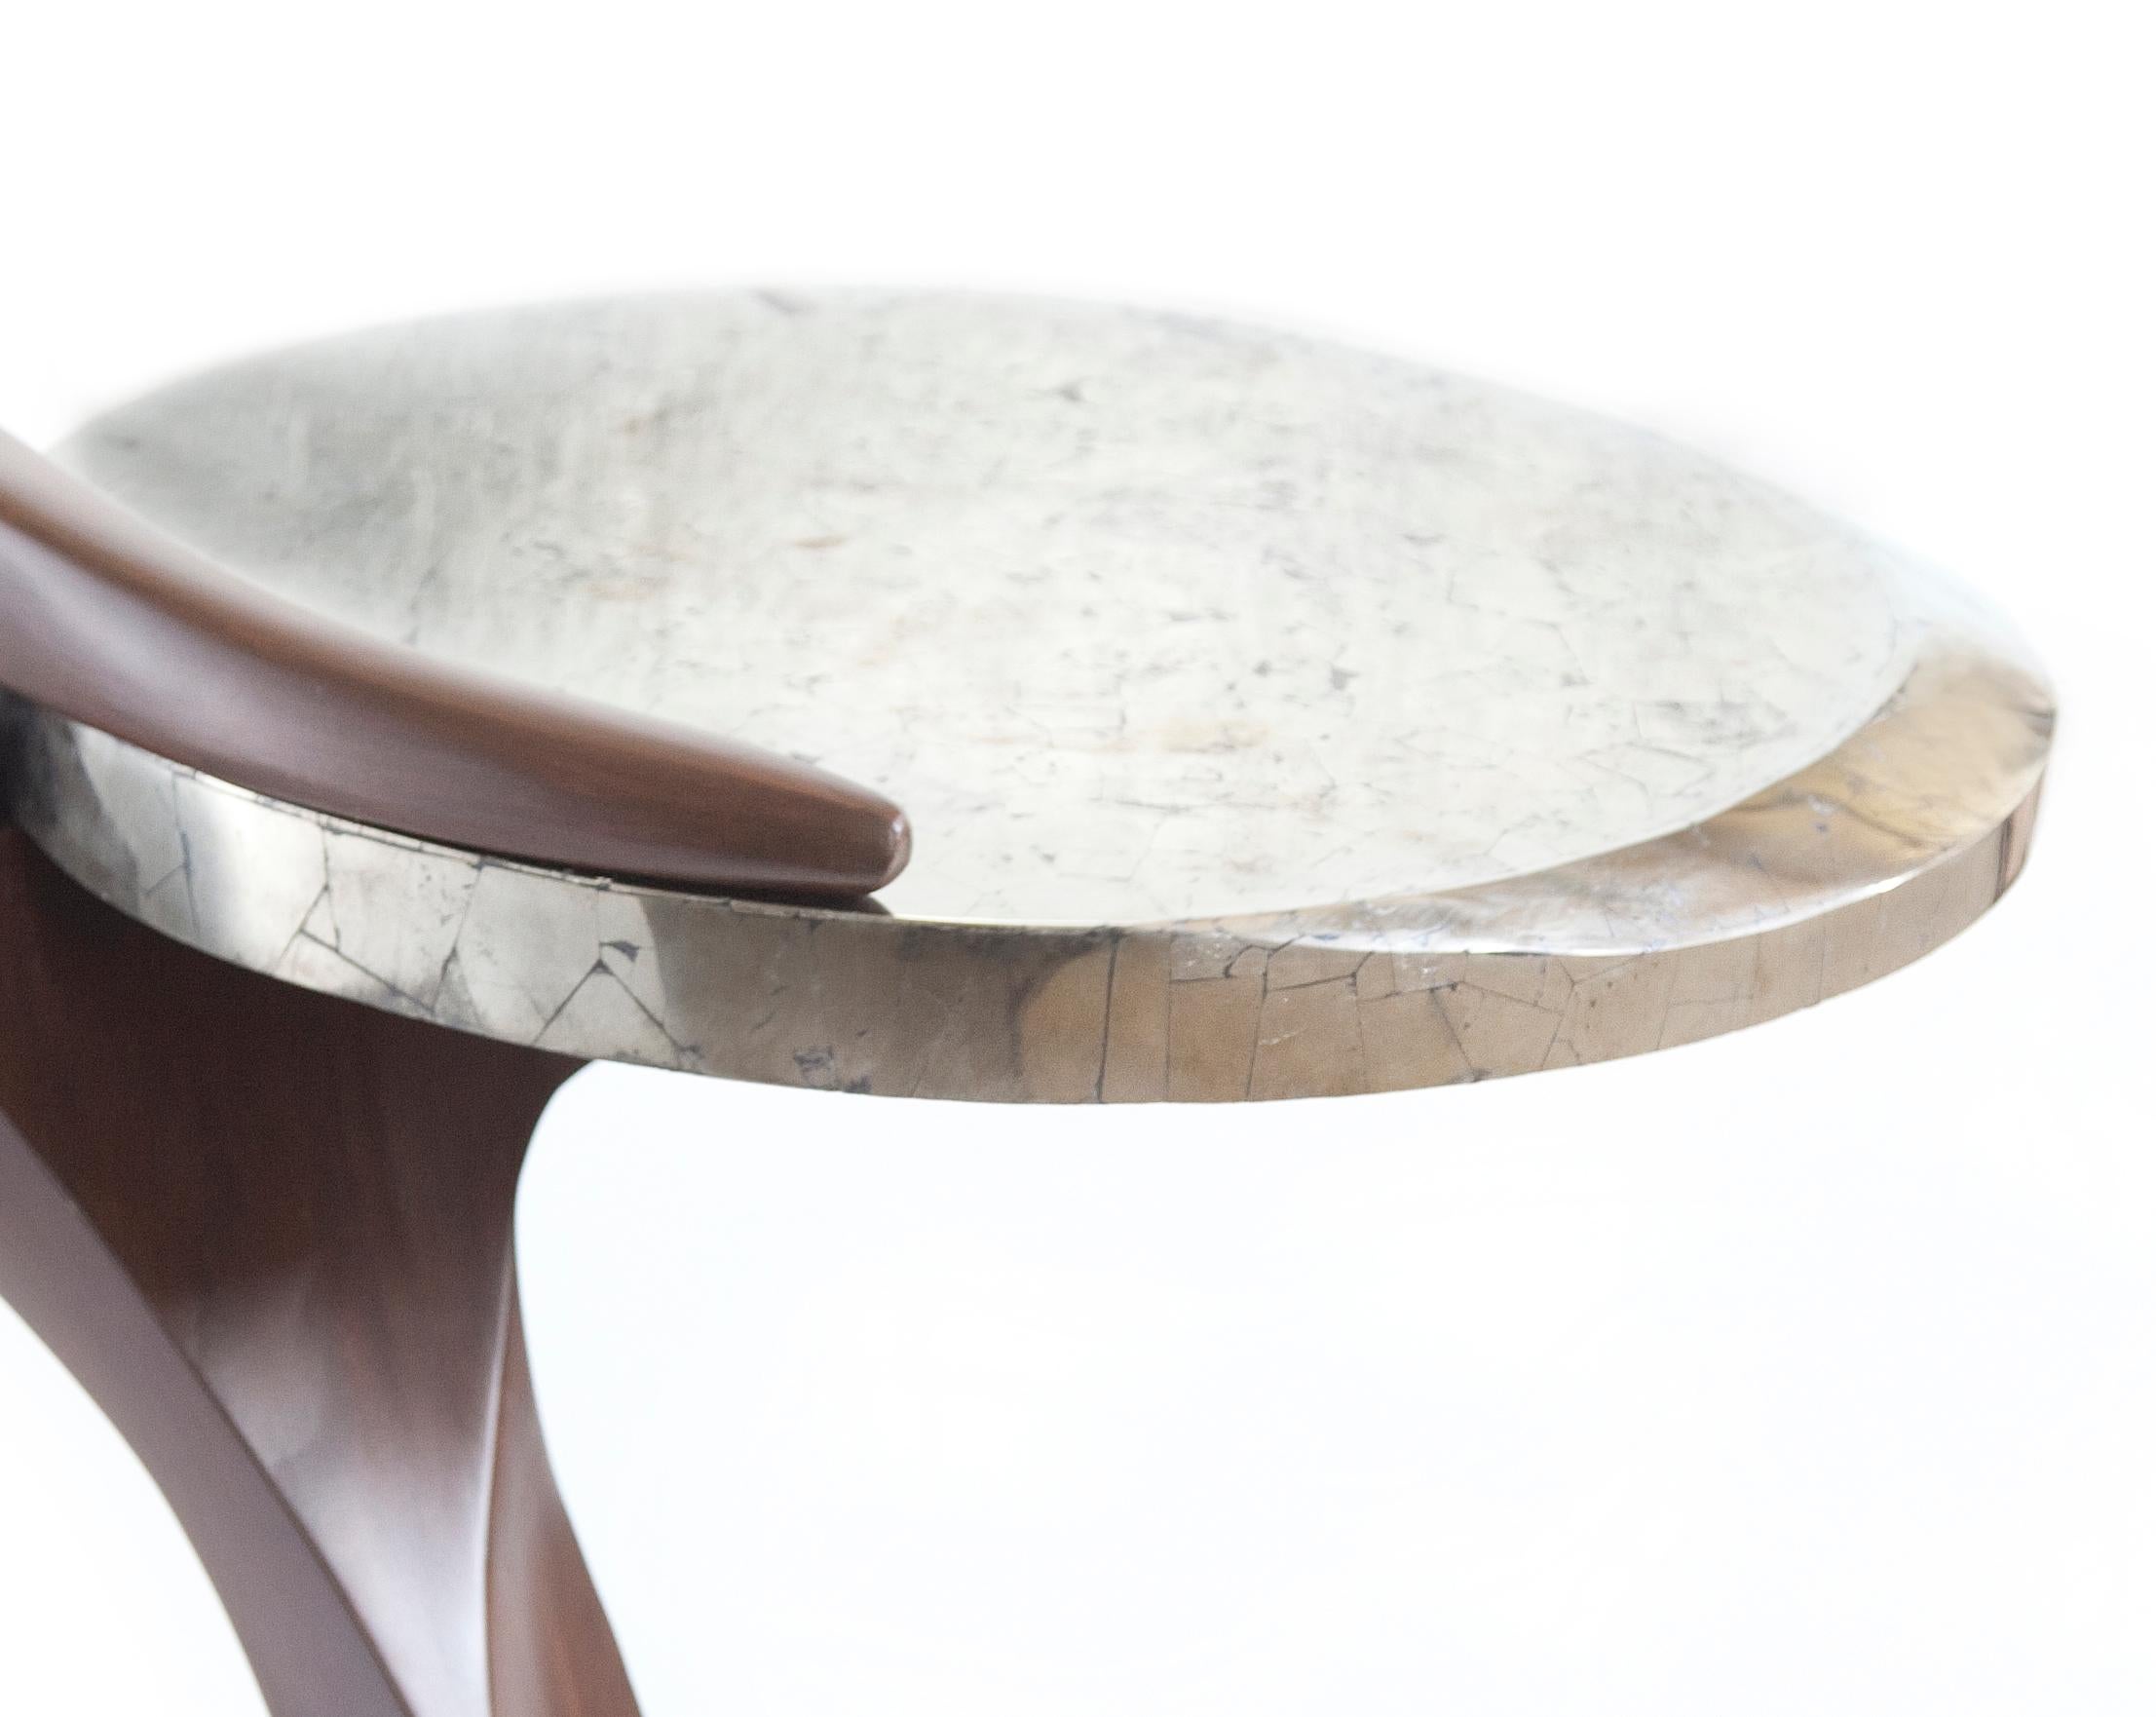 Organic Modern Wood Sculpted Table with a Pyrite Top Inspired by Zaha Hadid For Sale